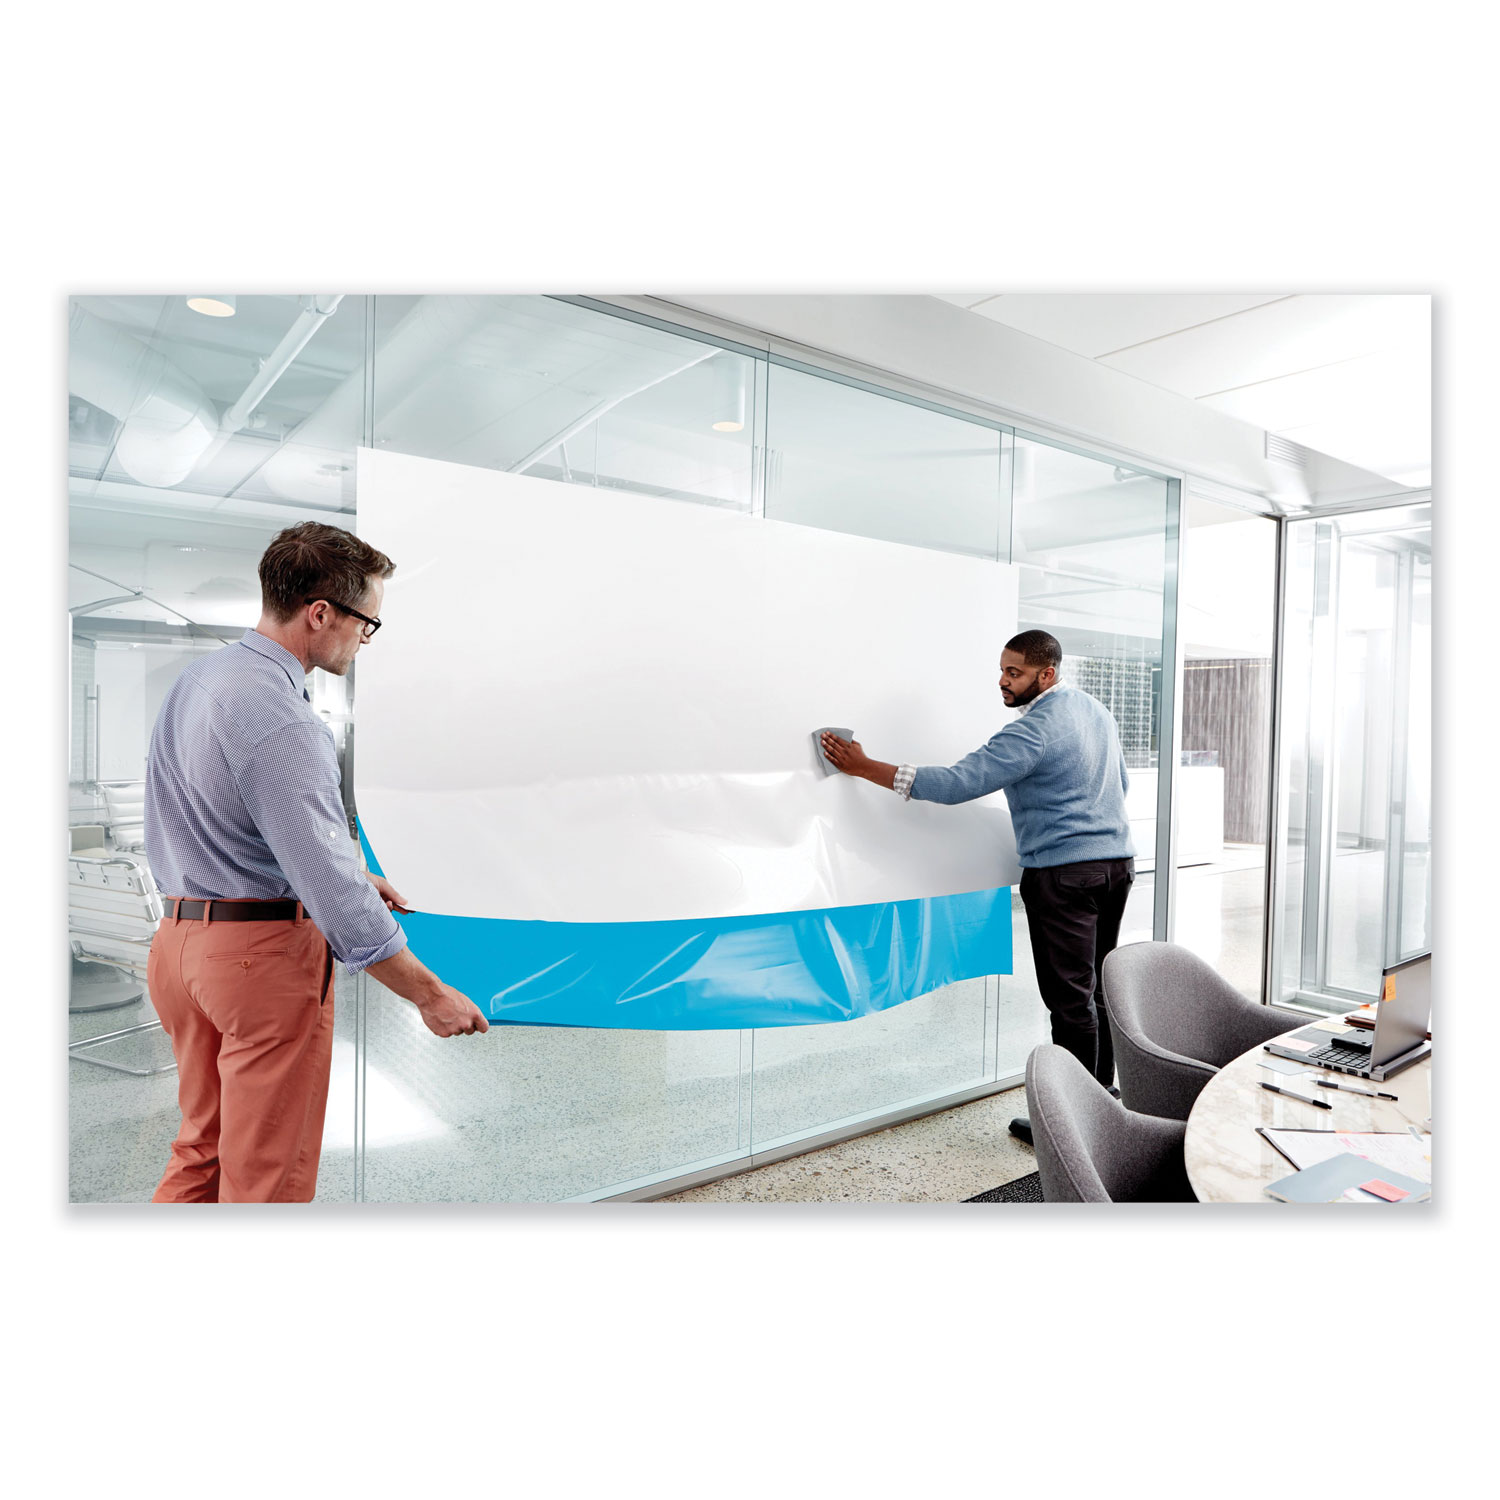 Buy Post-It Dry-Erase Surface 36 x 48 White Film Roll (MMMDEF4X3)